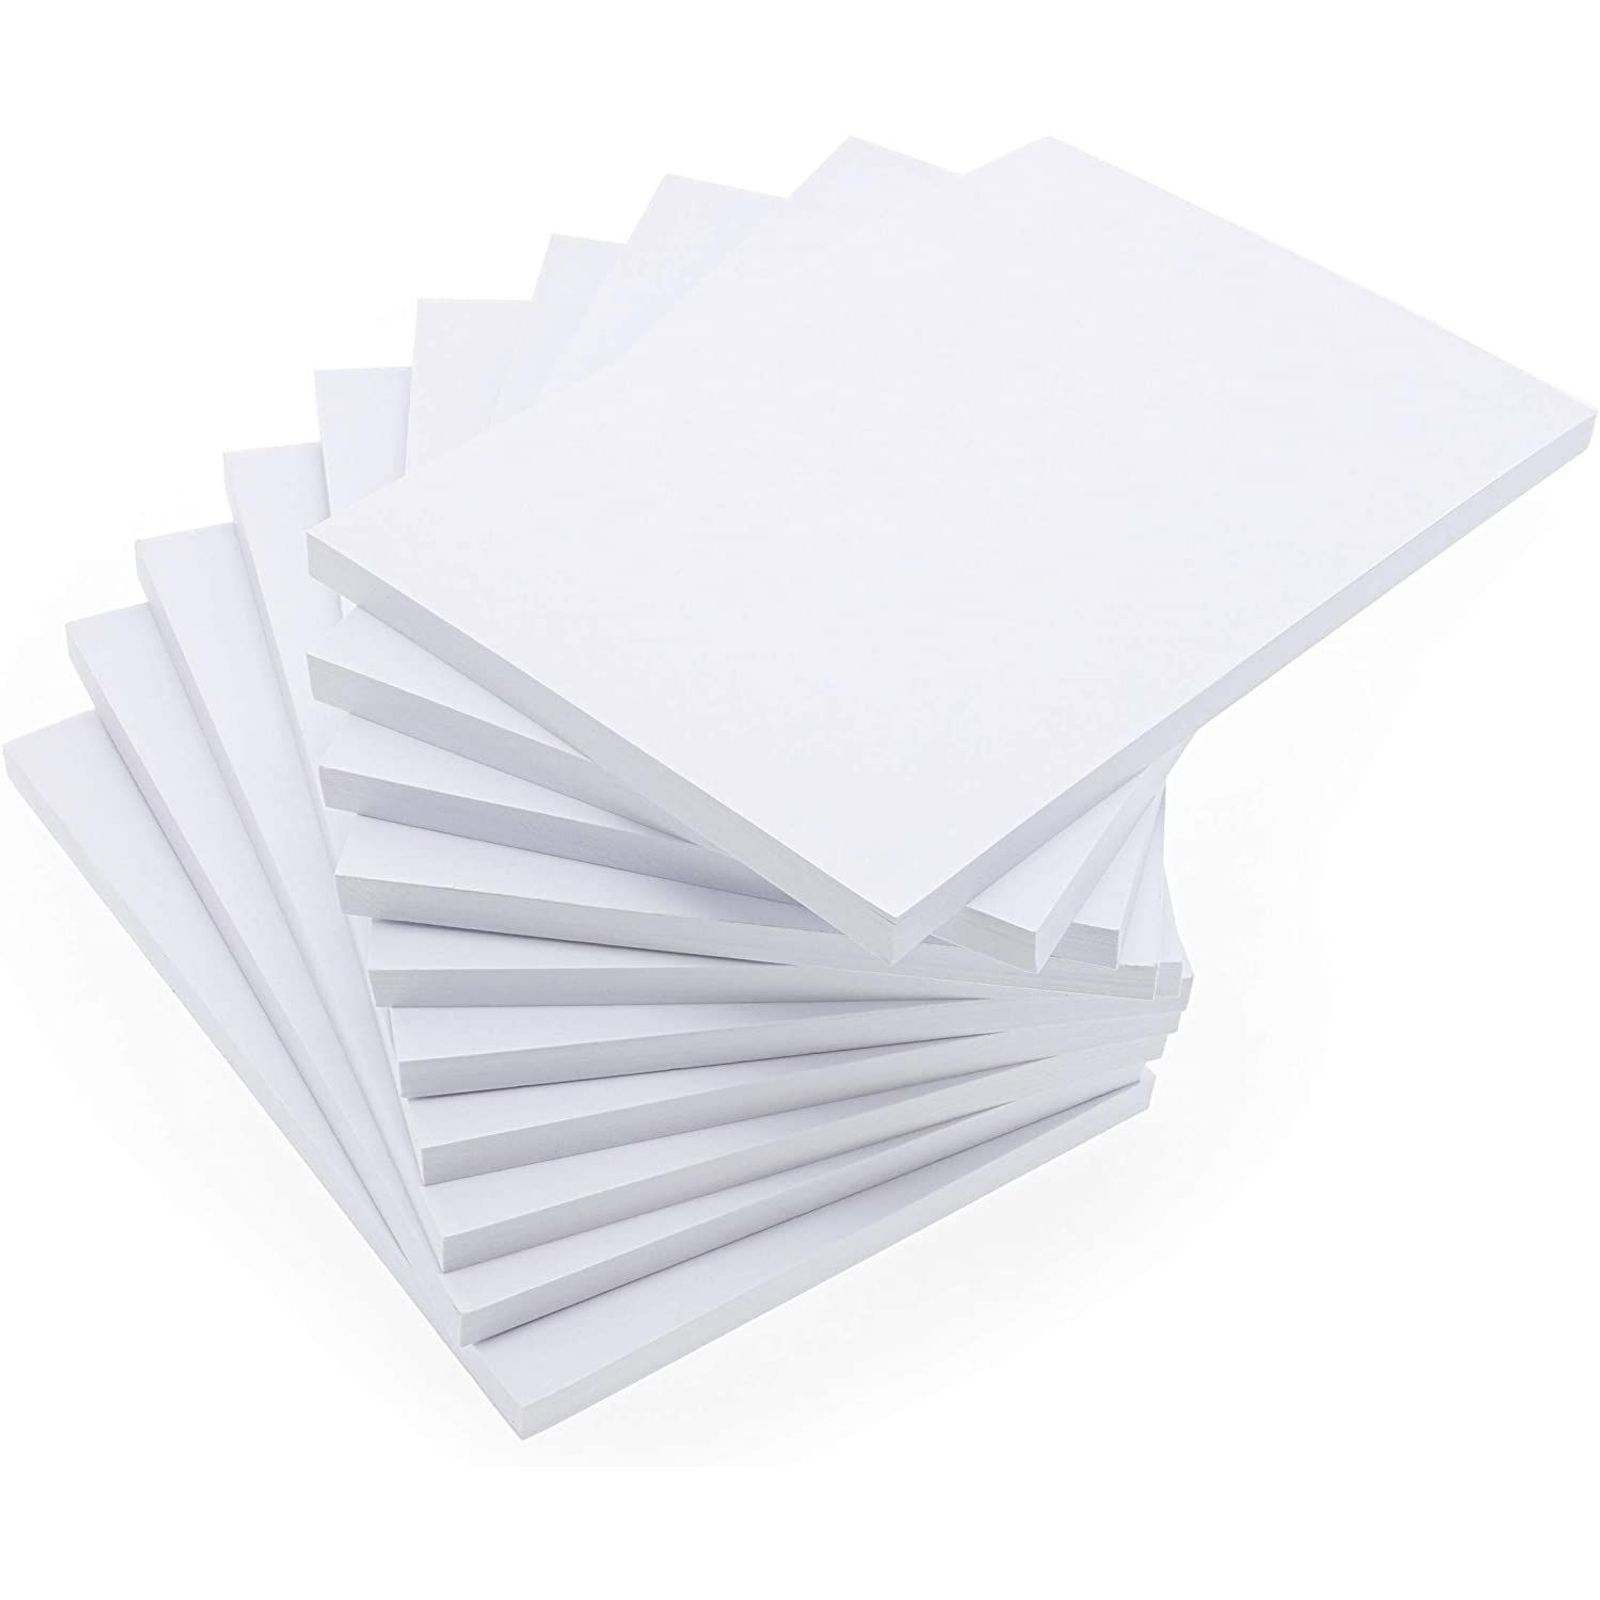 Plain Notepad, Blank Writing Pads (4 x 6 in, 10 Pack)